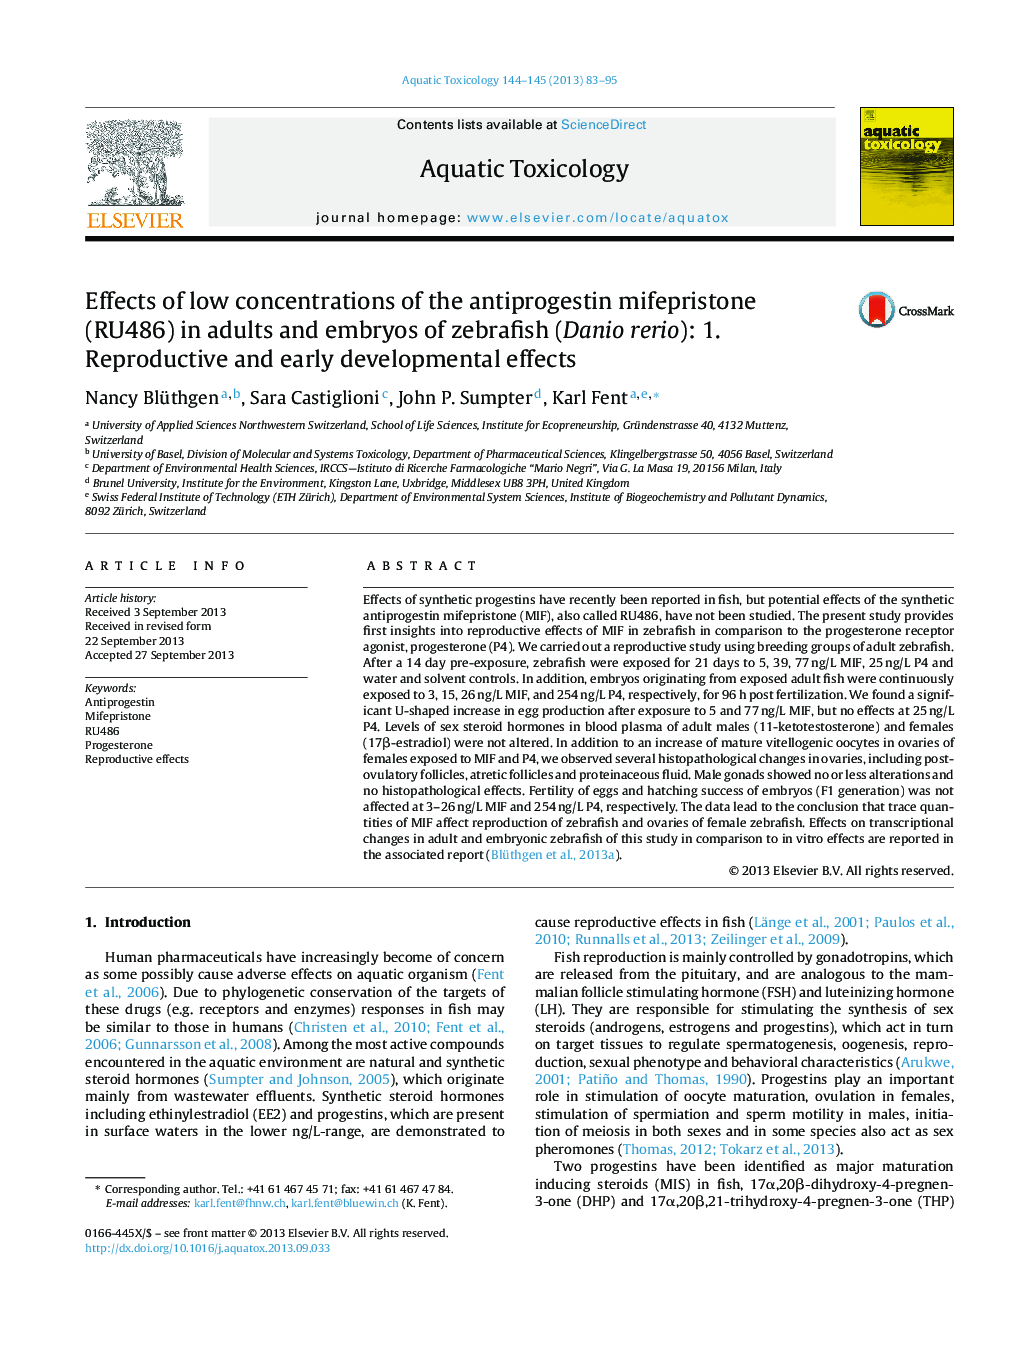 Effects of low concentrations of the antiprogestin mifepristone (RU486) in adults and embryos of zebrafish (Danio rerio): 1. Reproductive and early developmental effects